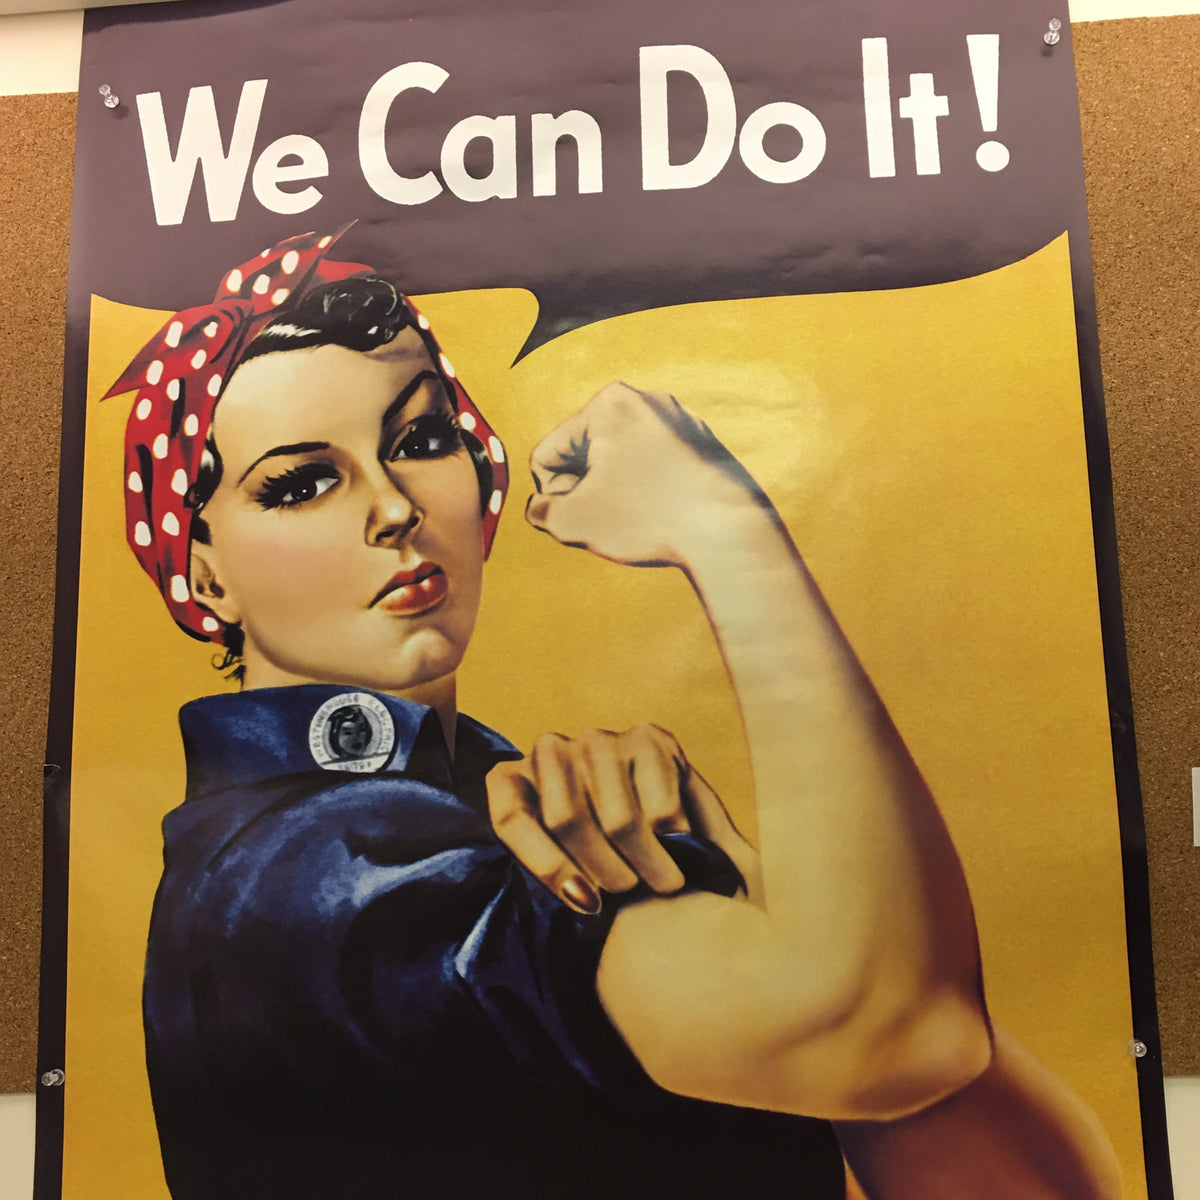 Rosie the Riveter; "We Can Do It!" Poster